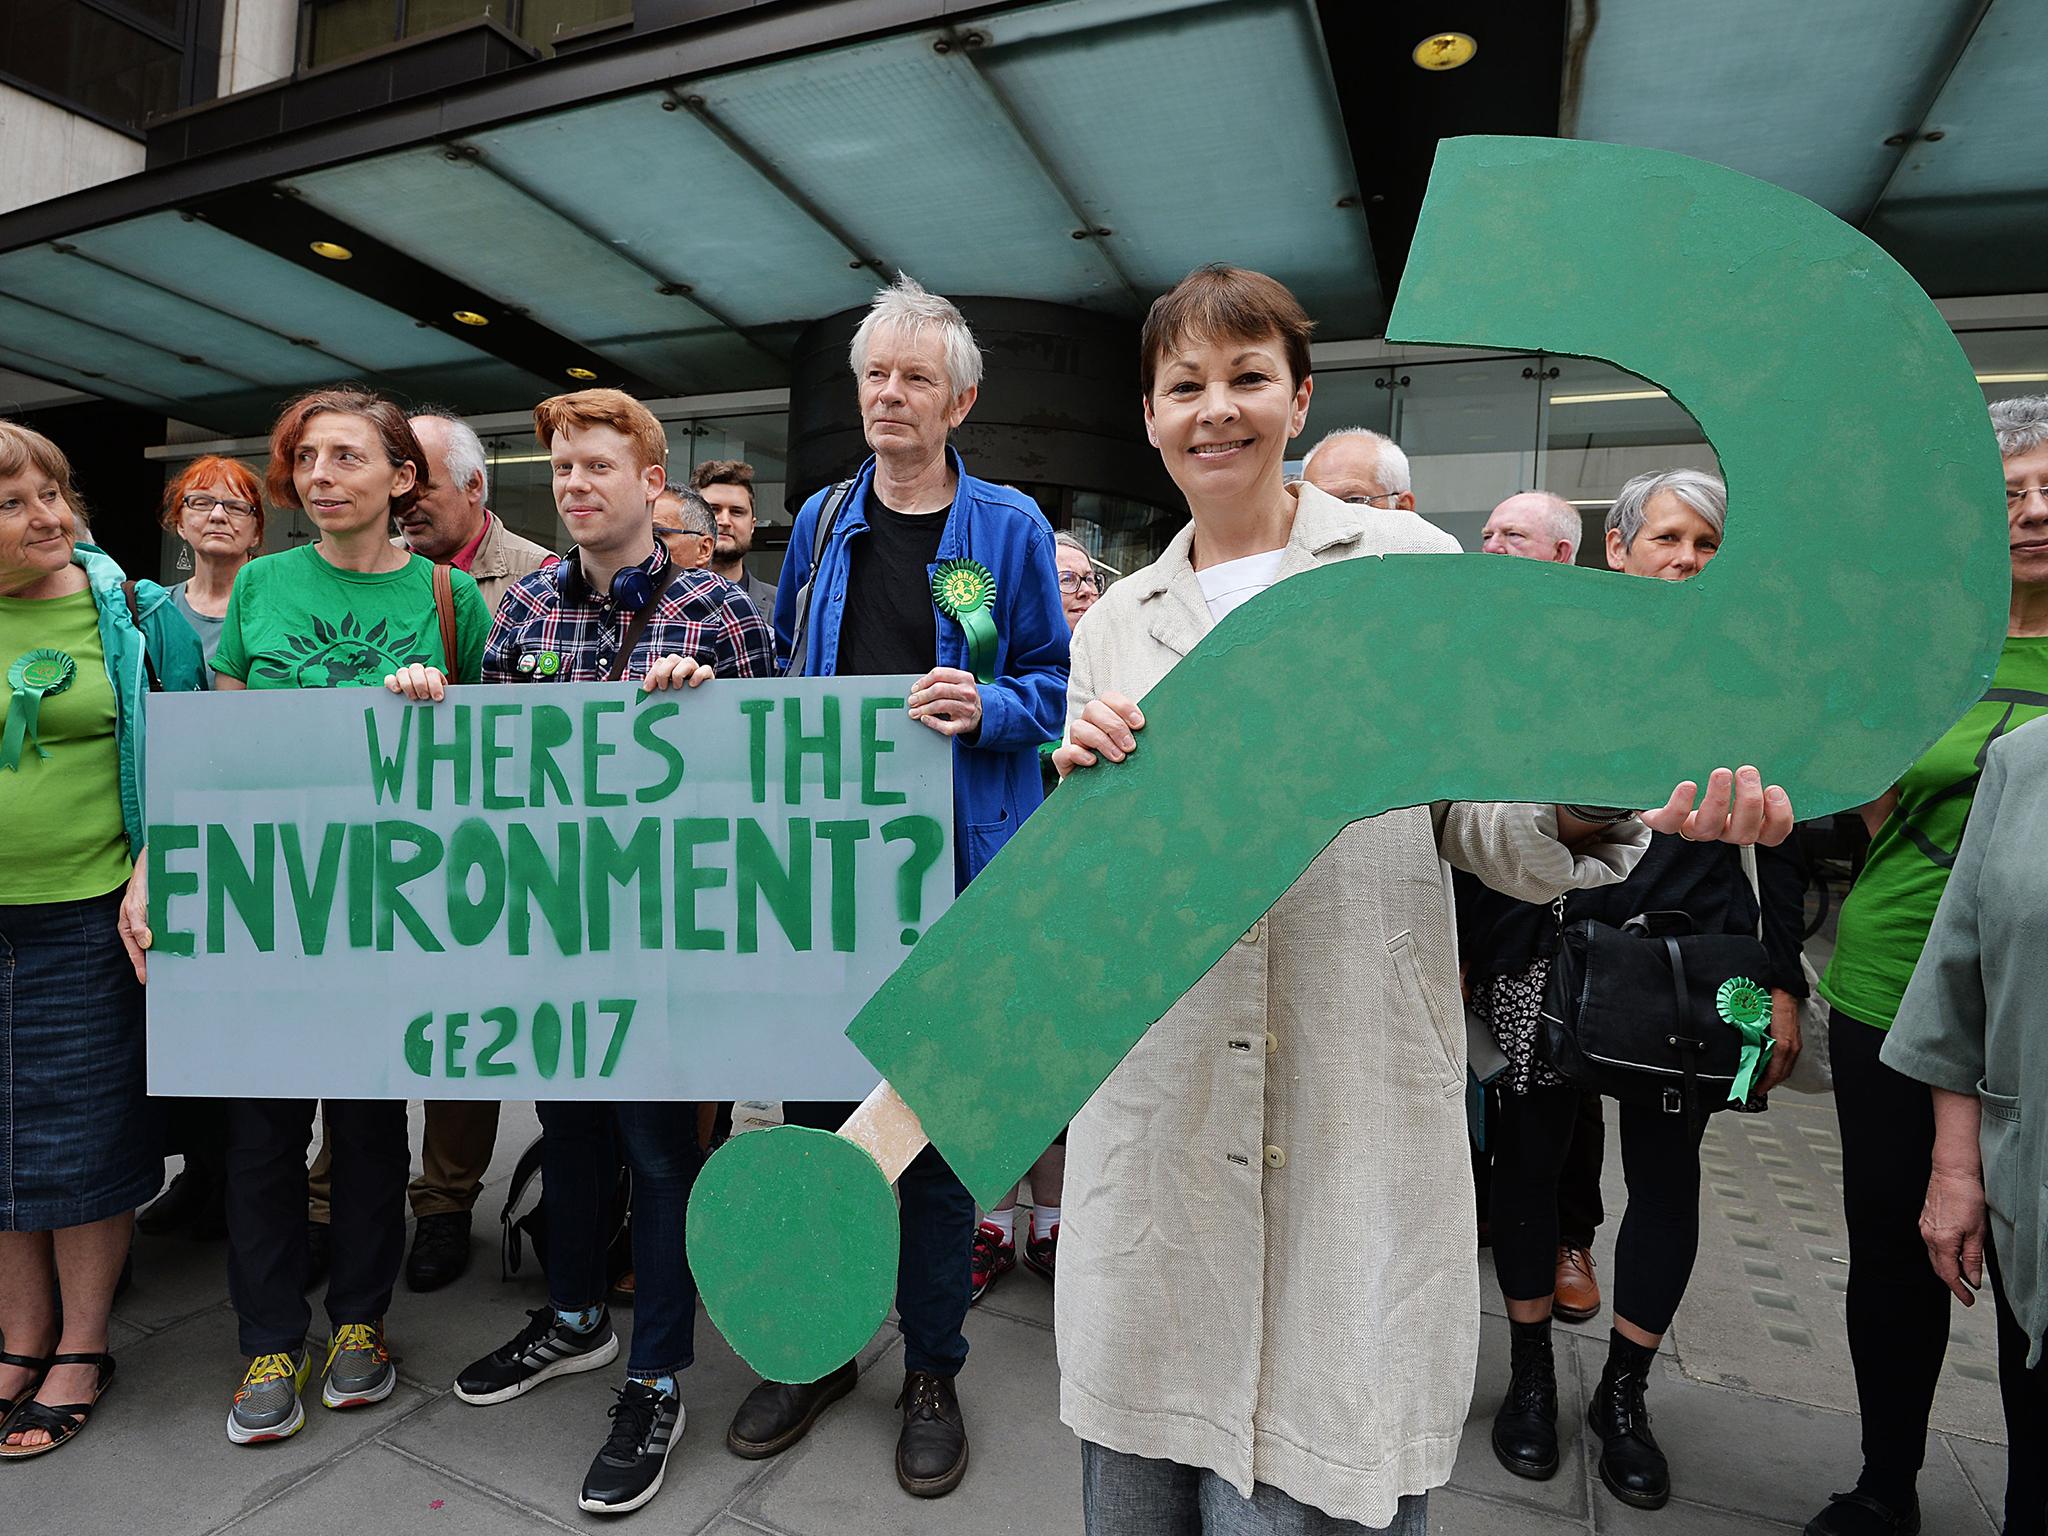 The Green Party is 'appalled' at the lack of discussion about the environment